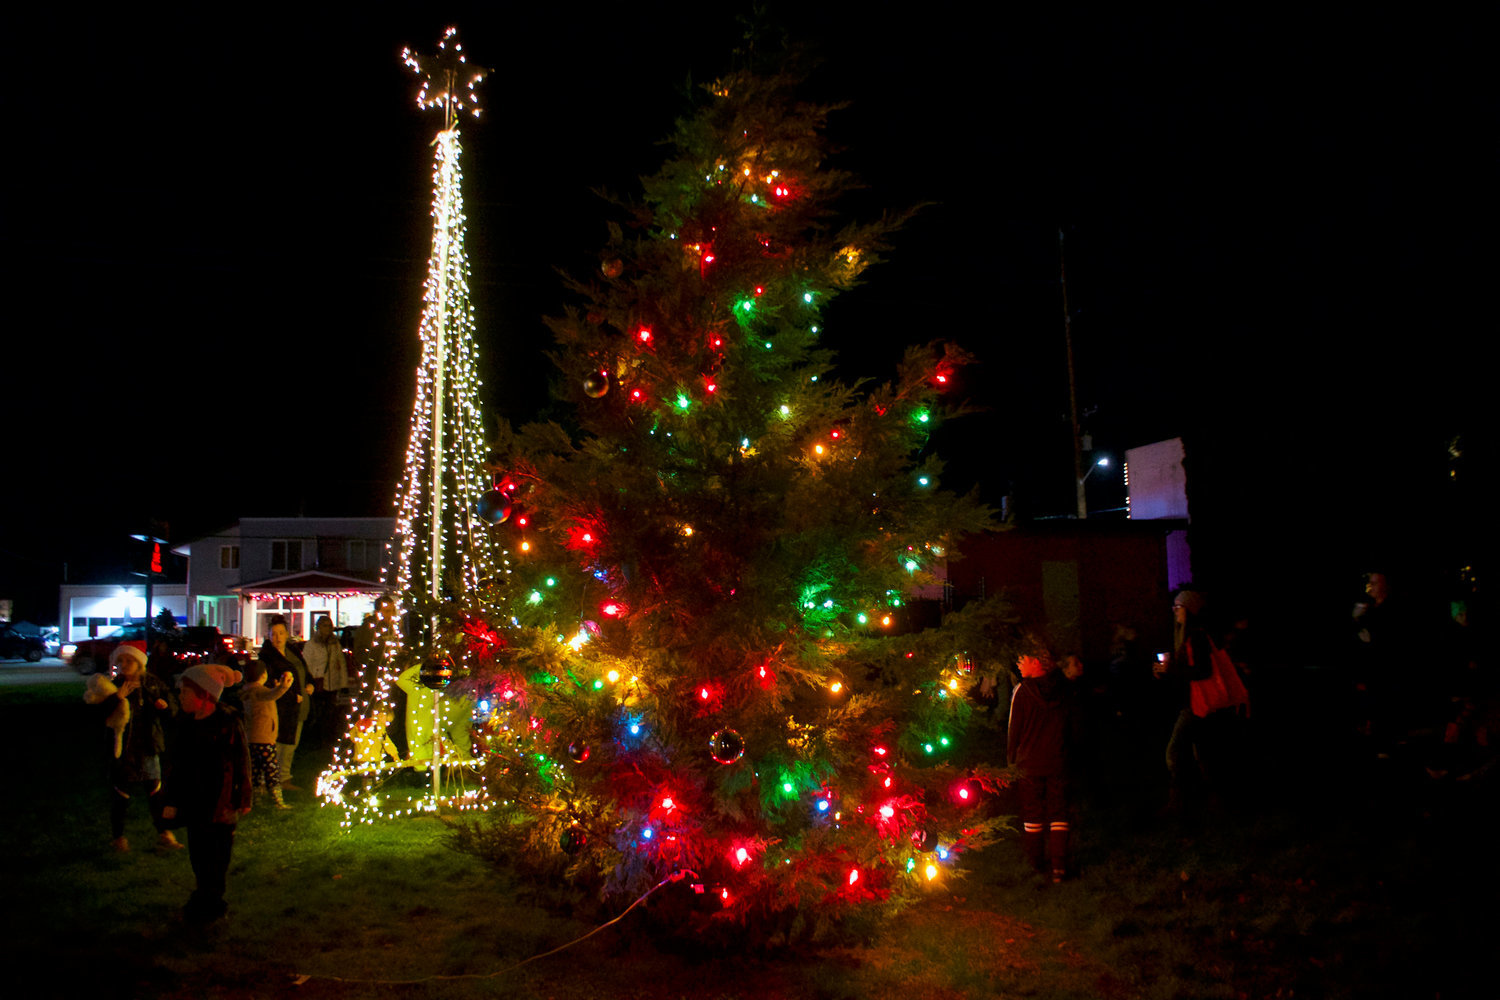 Community members enjoy the Rainier Christmas tree lighting event in this file photo. The cities of Tenino, Rainier and Yelm will all light up their respective Christmas trees this week.